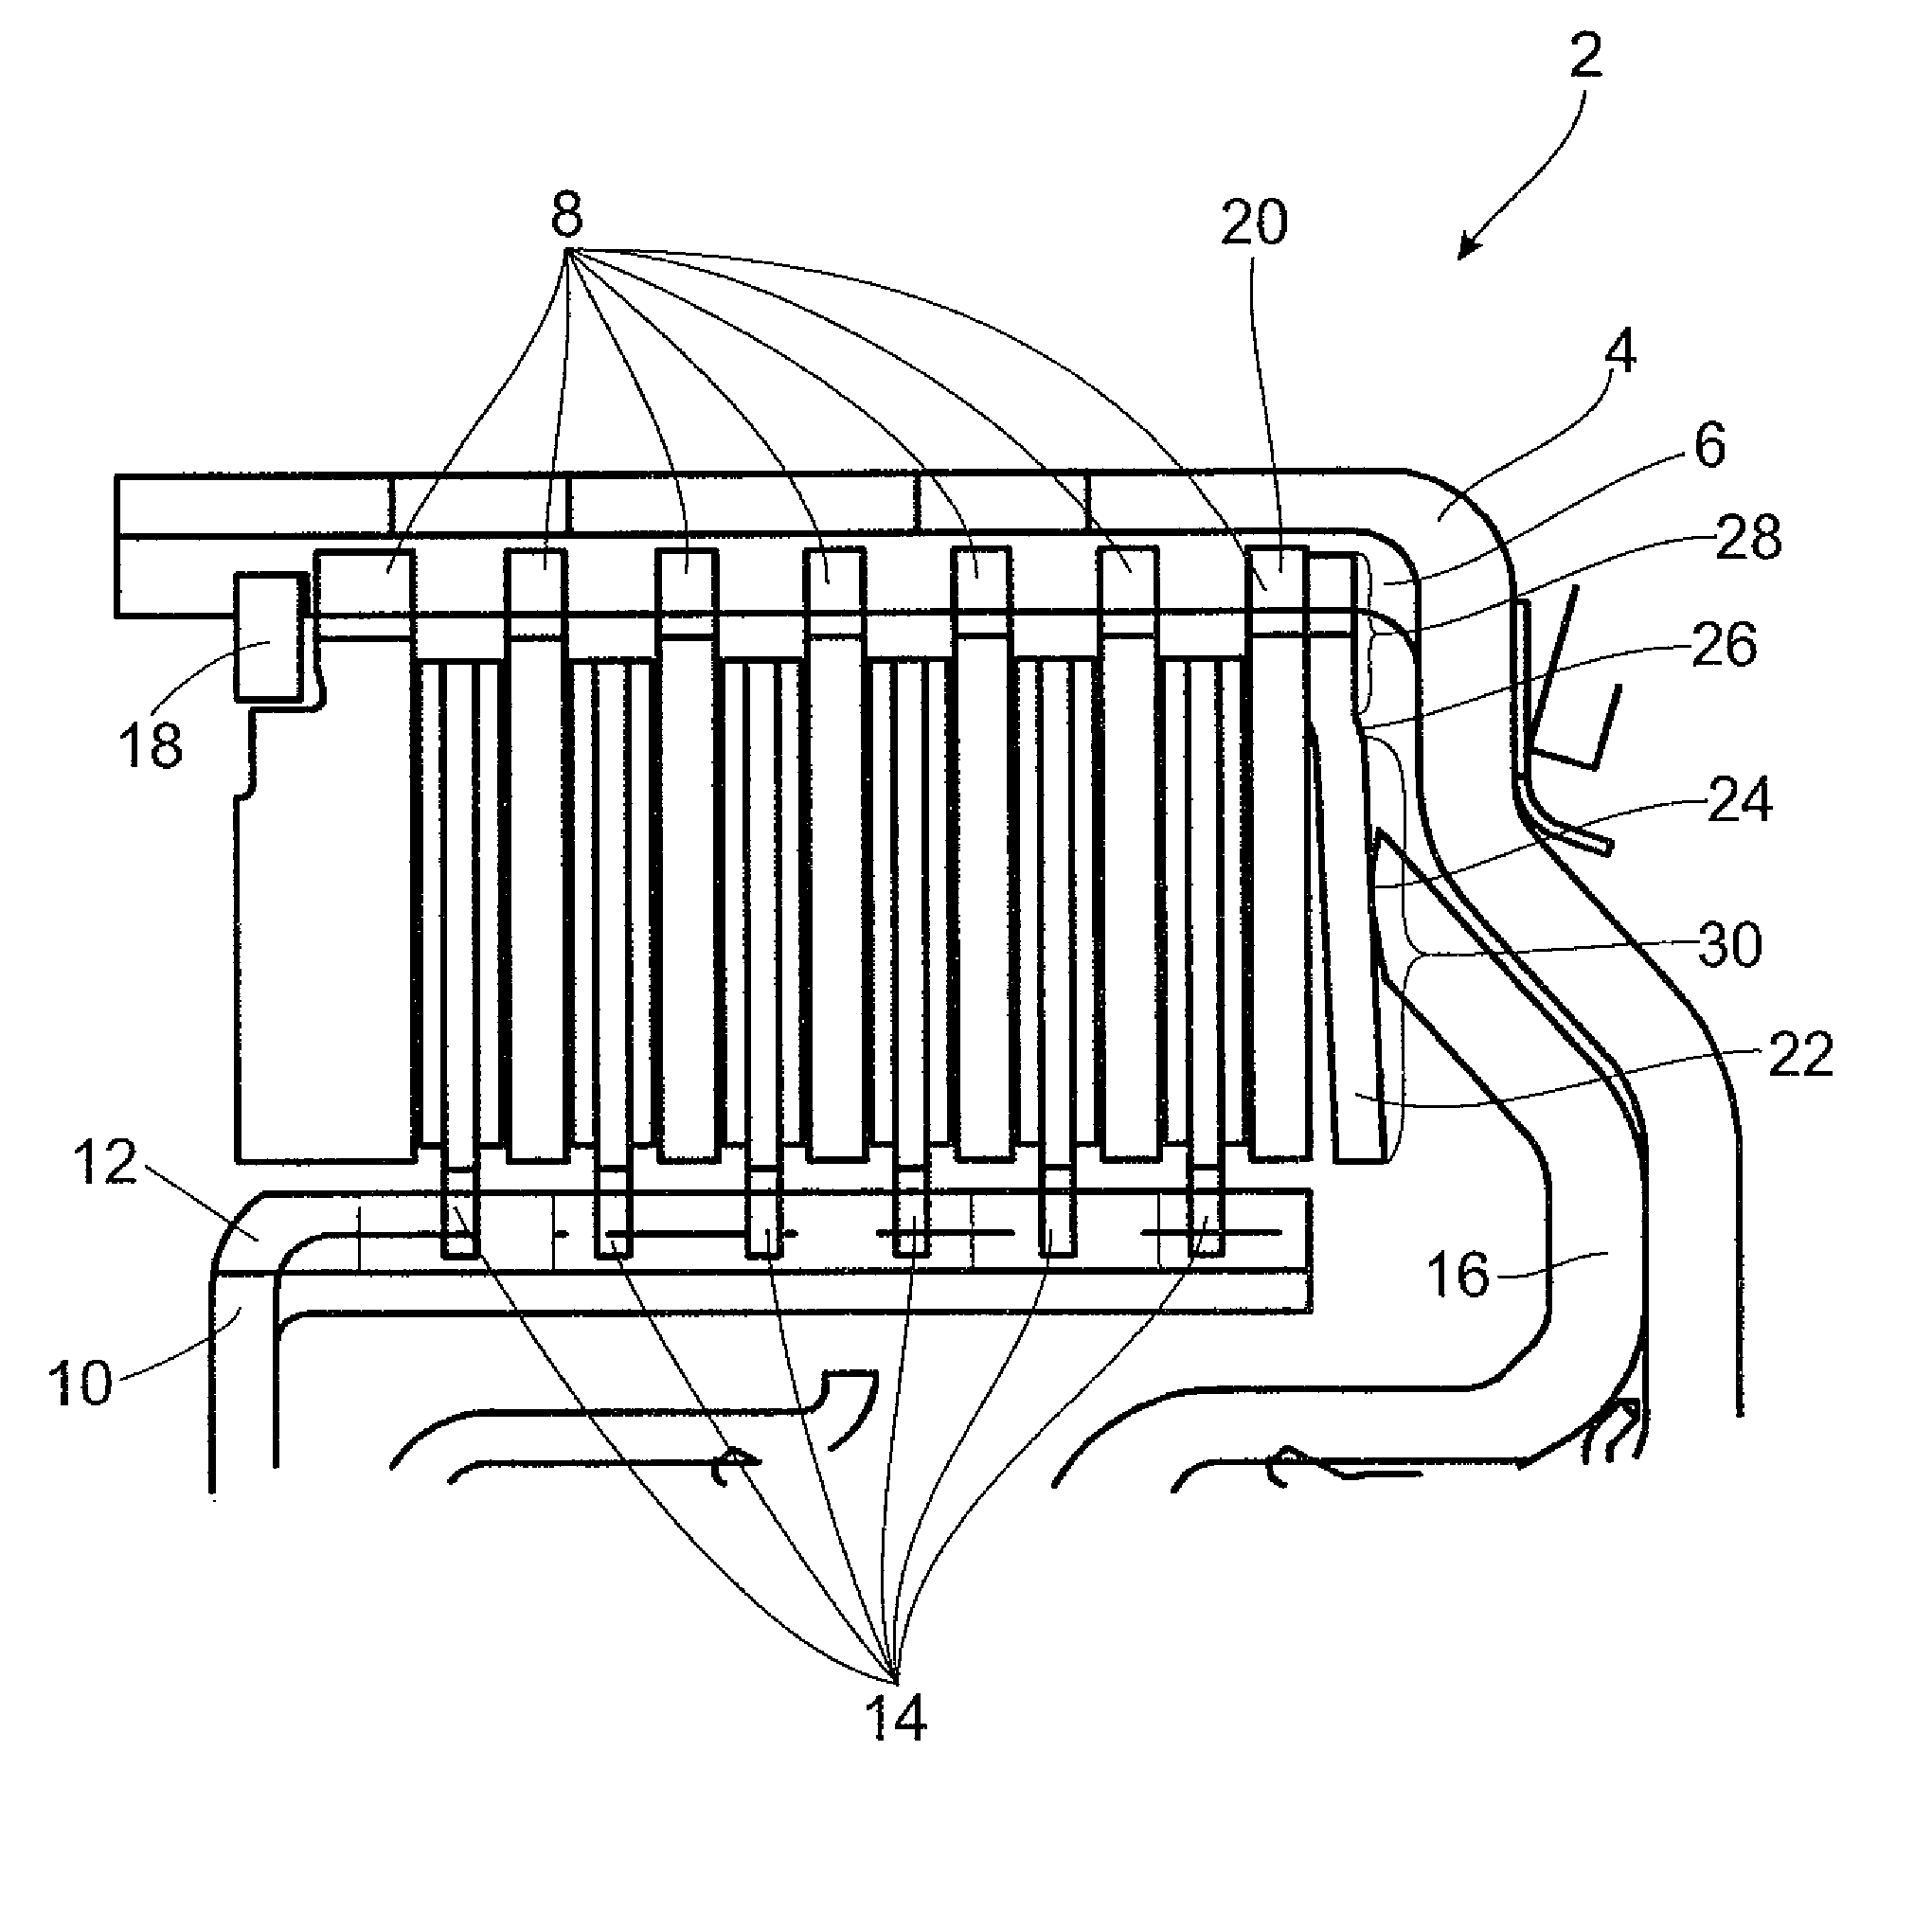 Multiple-disk clutch with resilient element